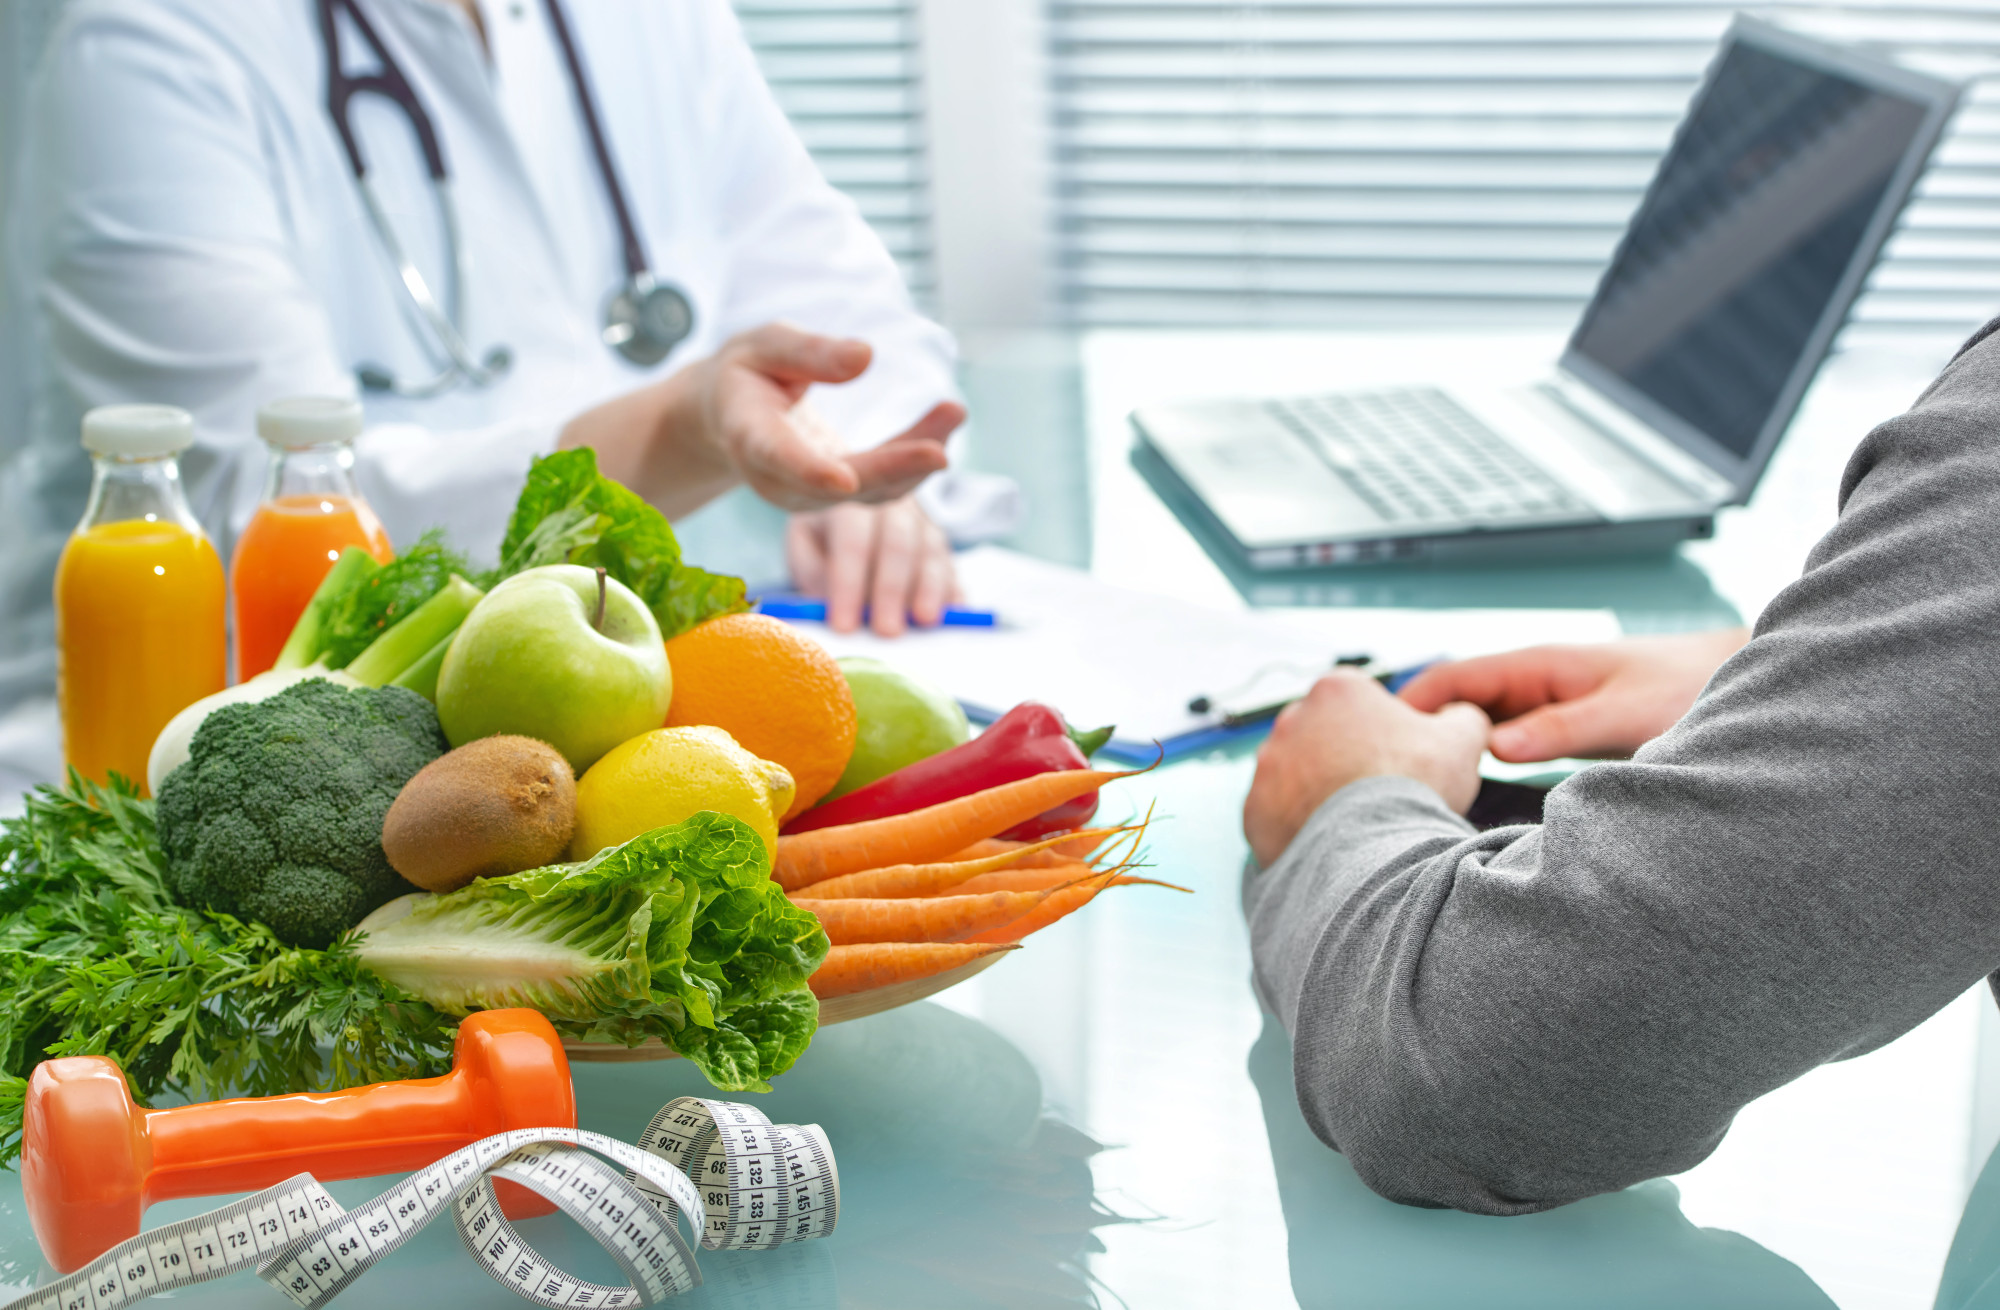 how eating more fruit and vegetables – now prescribed as medicine by doctors – can prevent and even reverse cancer, diabetes and other diseases